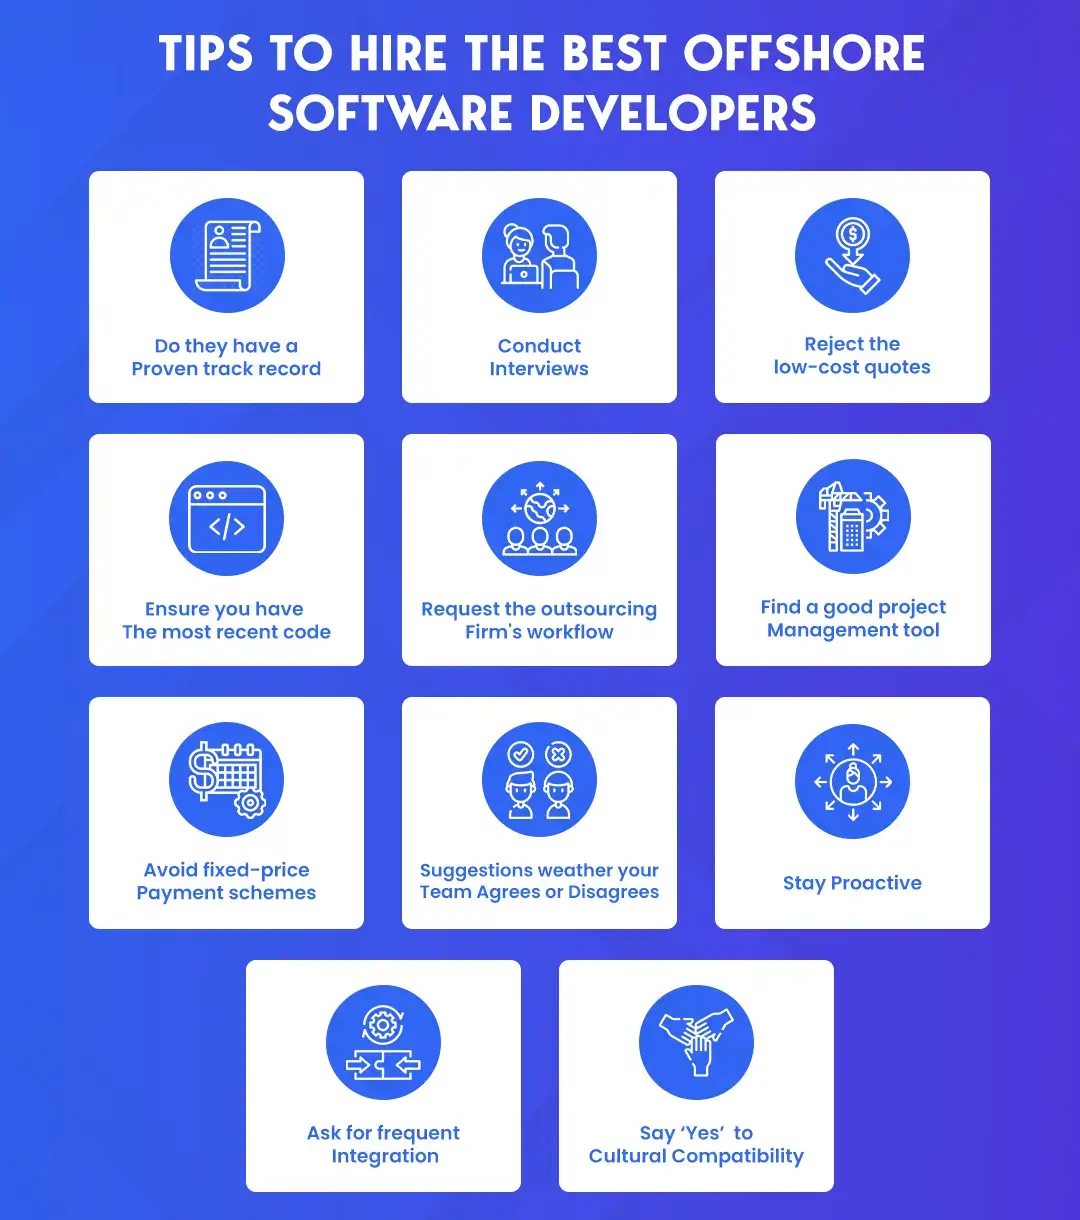 Tips to Hire the Best Offshore Software Developers